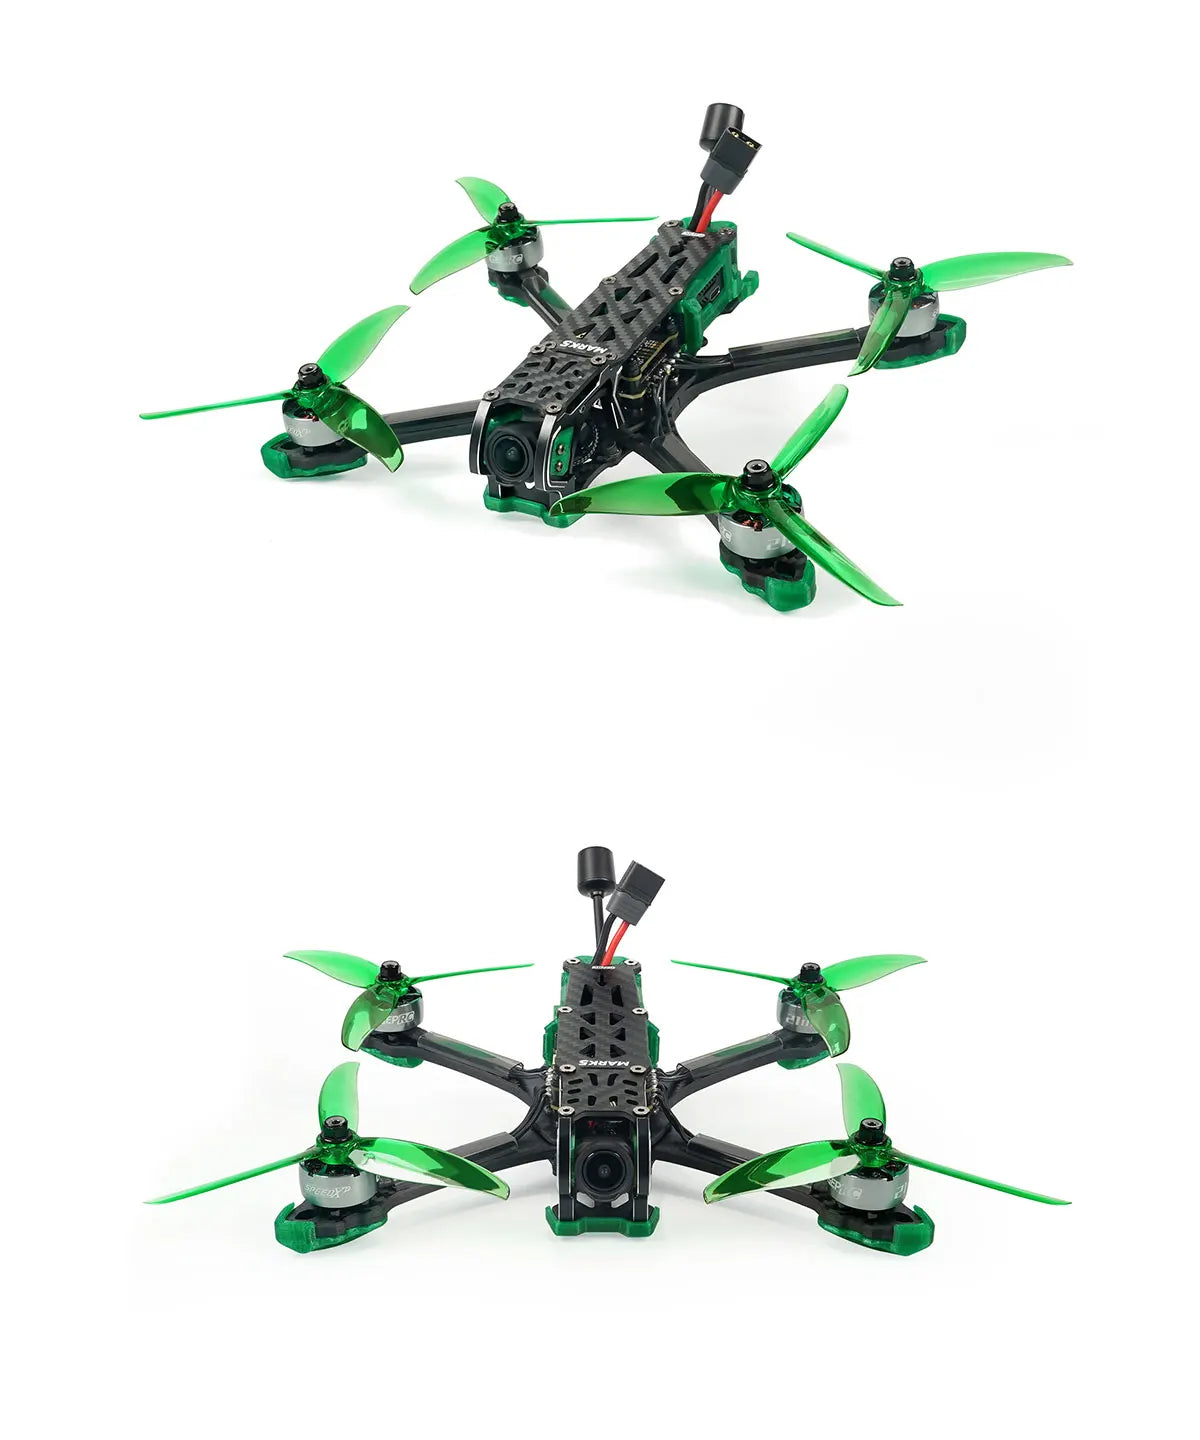 GEPRC MARK5 HD O3 Freestyle FPV Drone, Built-in Bluetooth, supports mobile phone wireless connection for parameter tuning